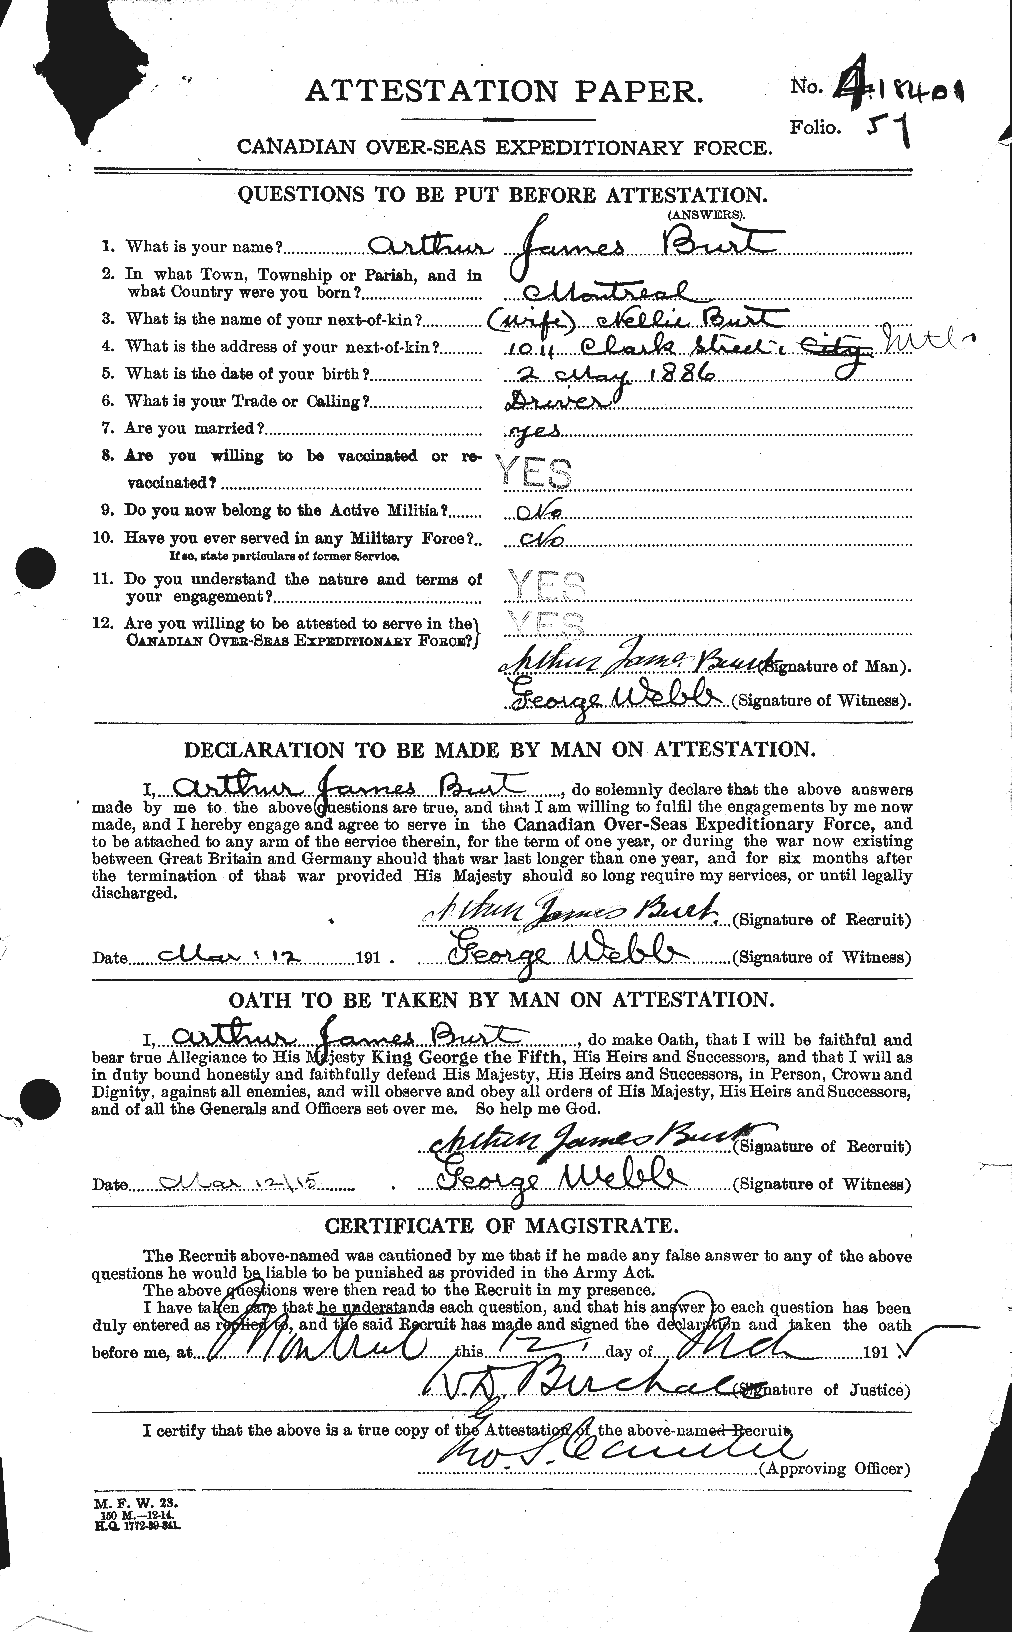 Personnel Records of the First World War - CEF 274975a